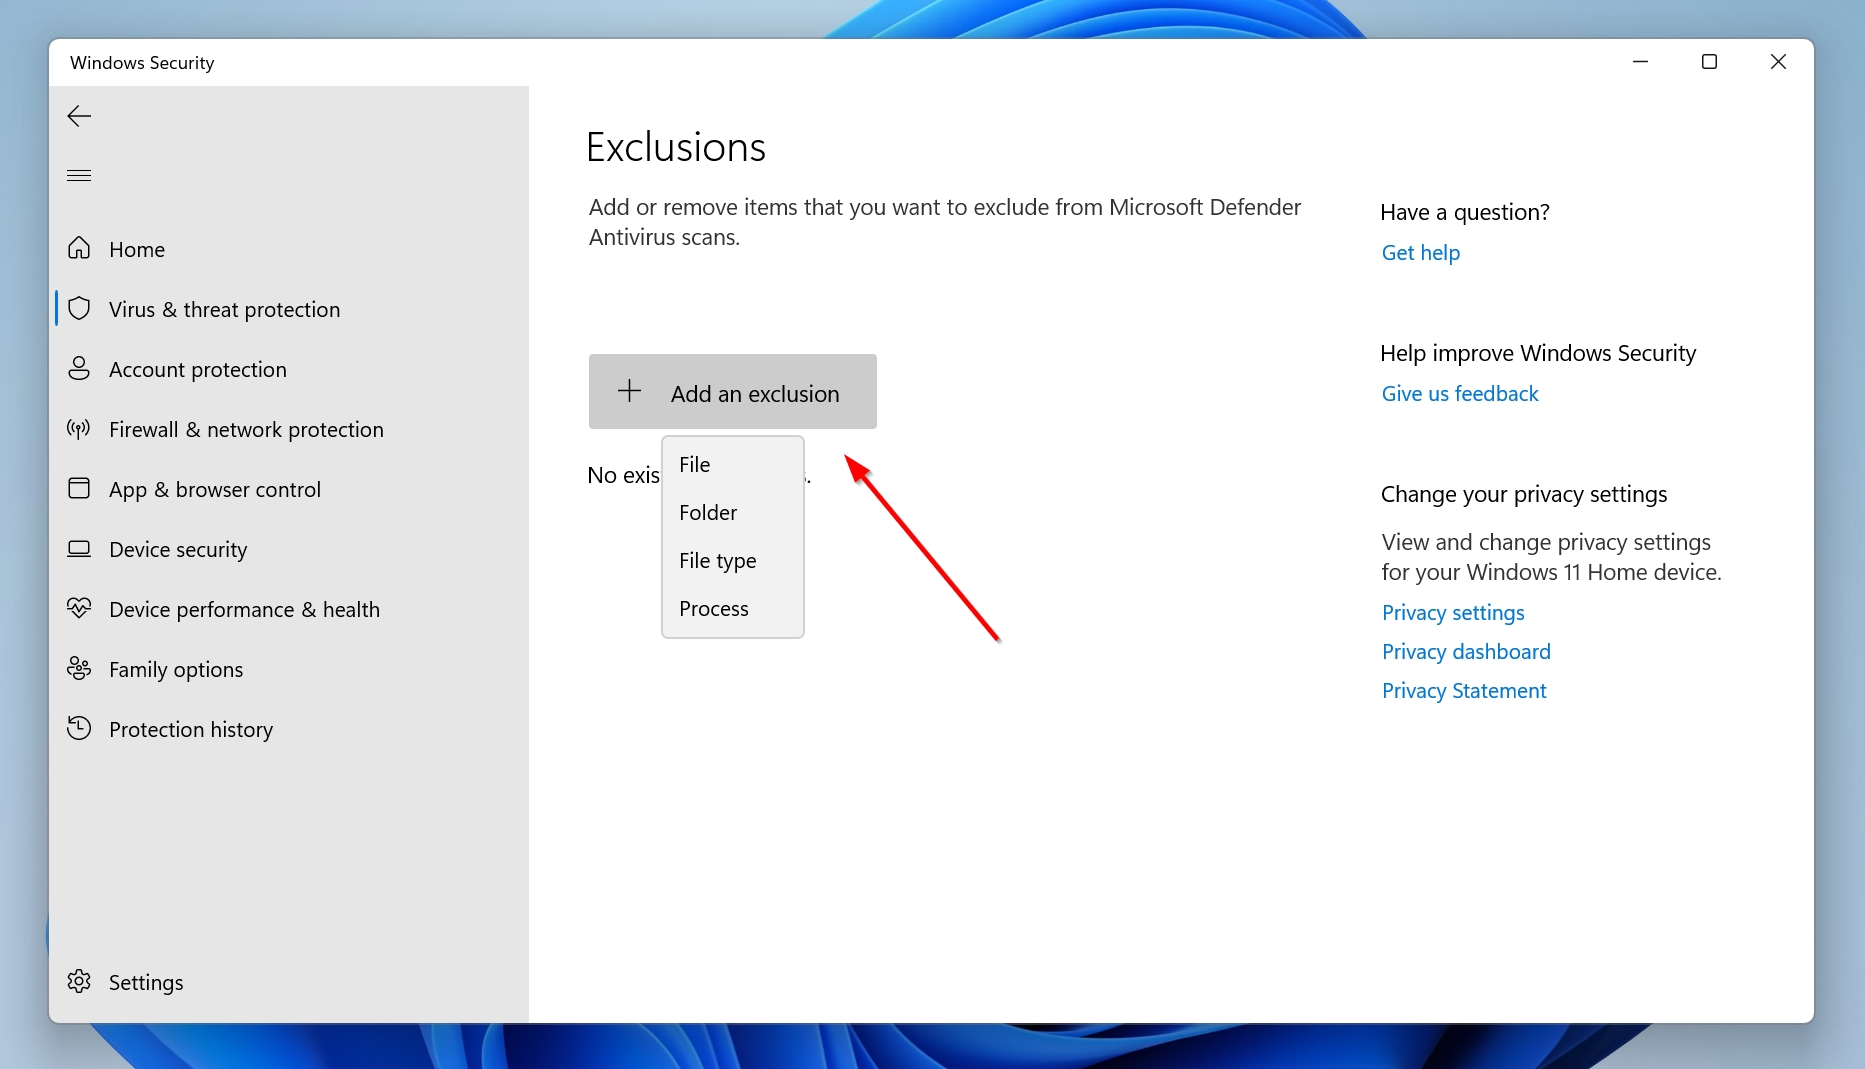 The Add an exclusion option in Windows Defender.